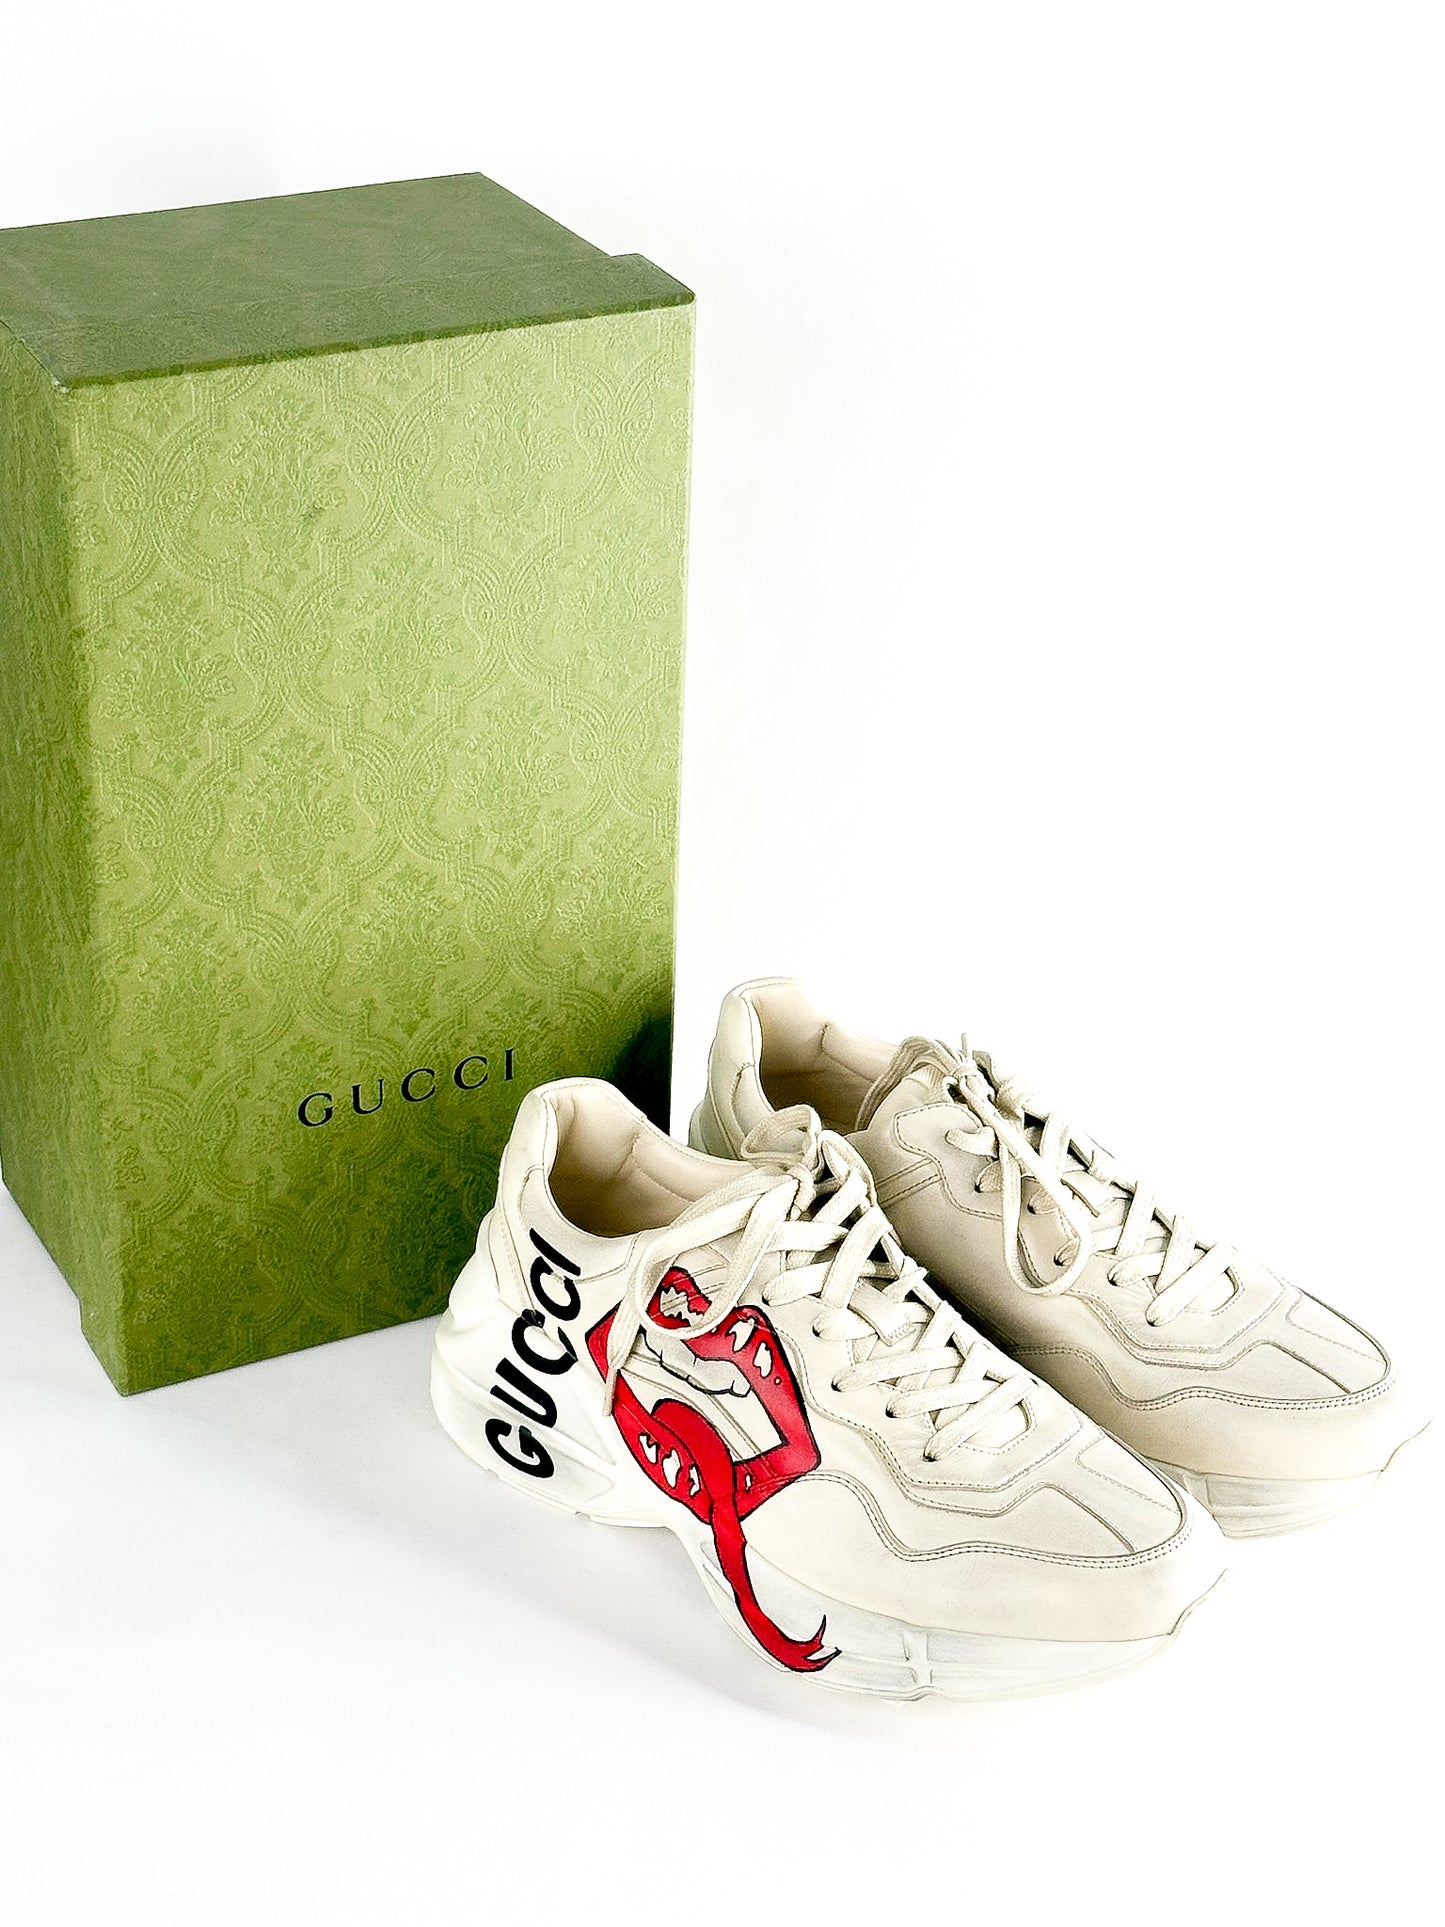 Gucci Cream Leather Rhyton Lace Up Sneakers Size 42